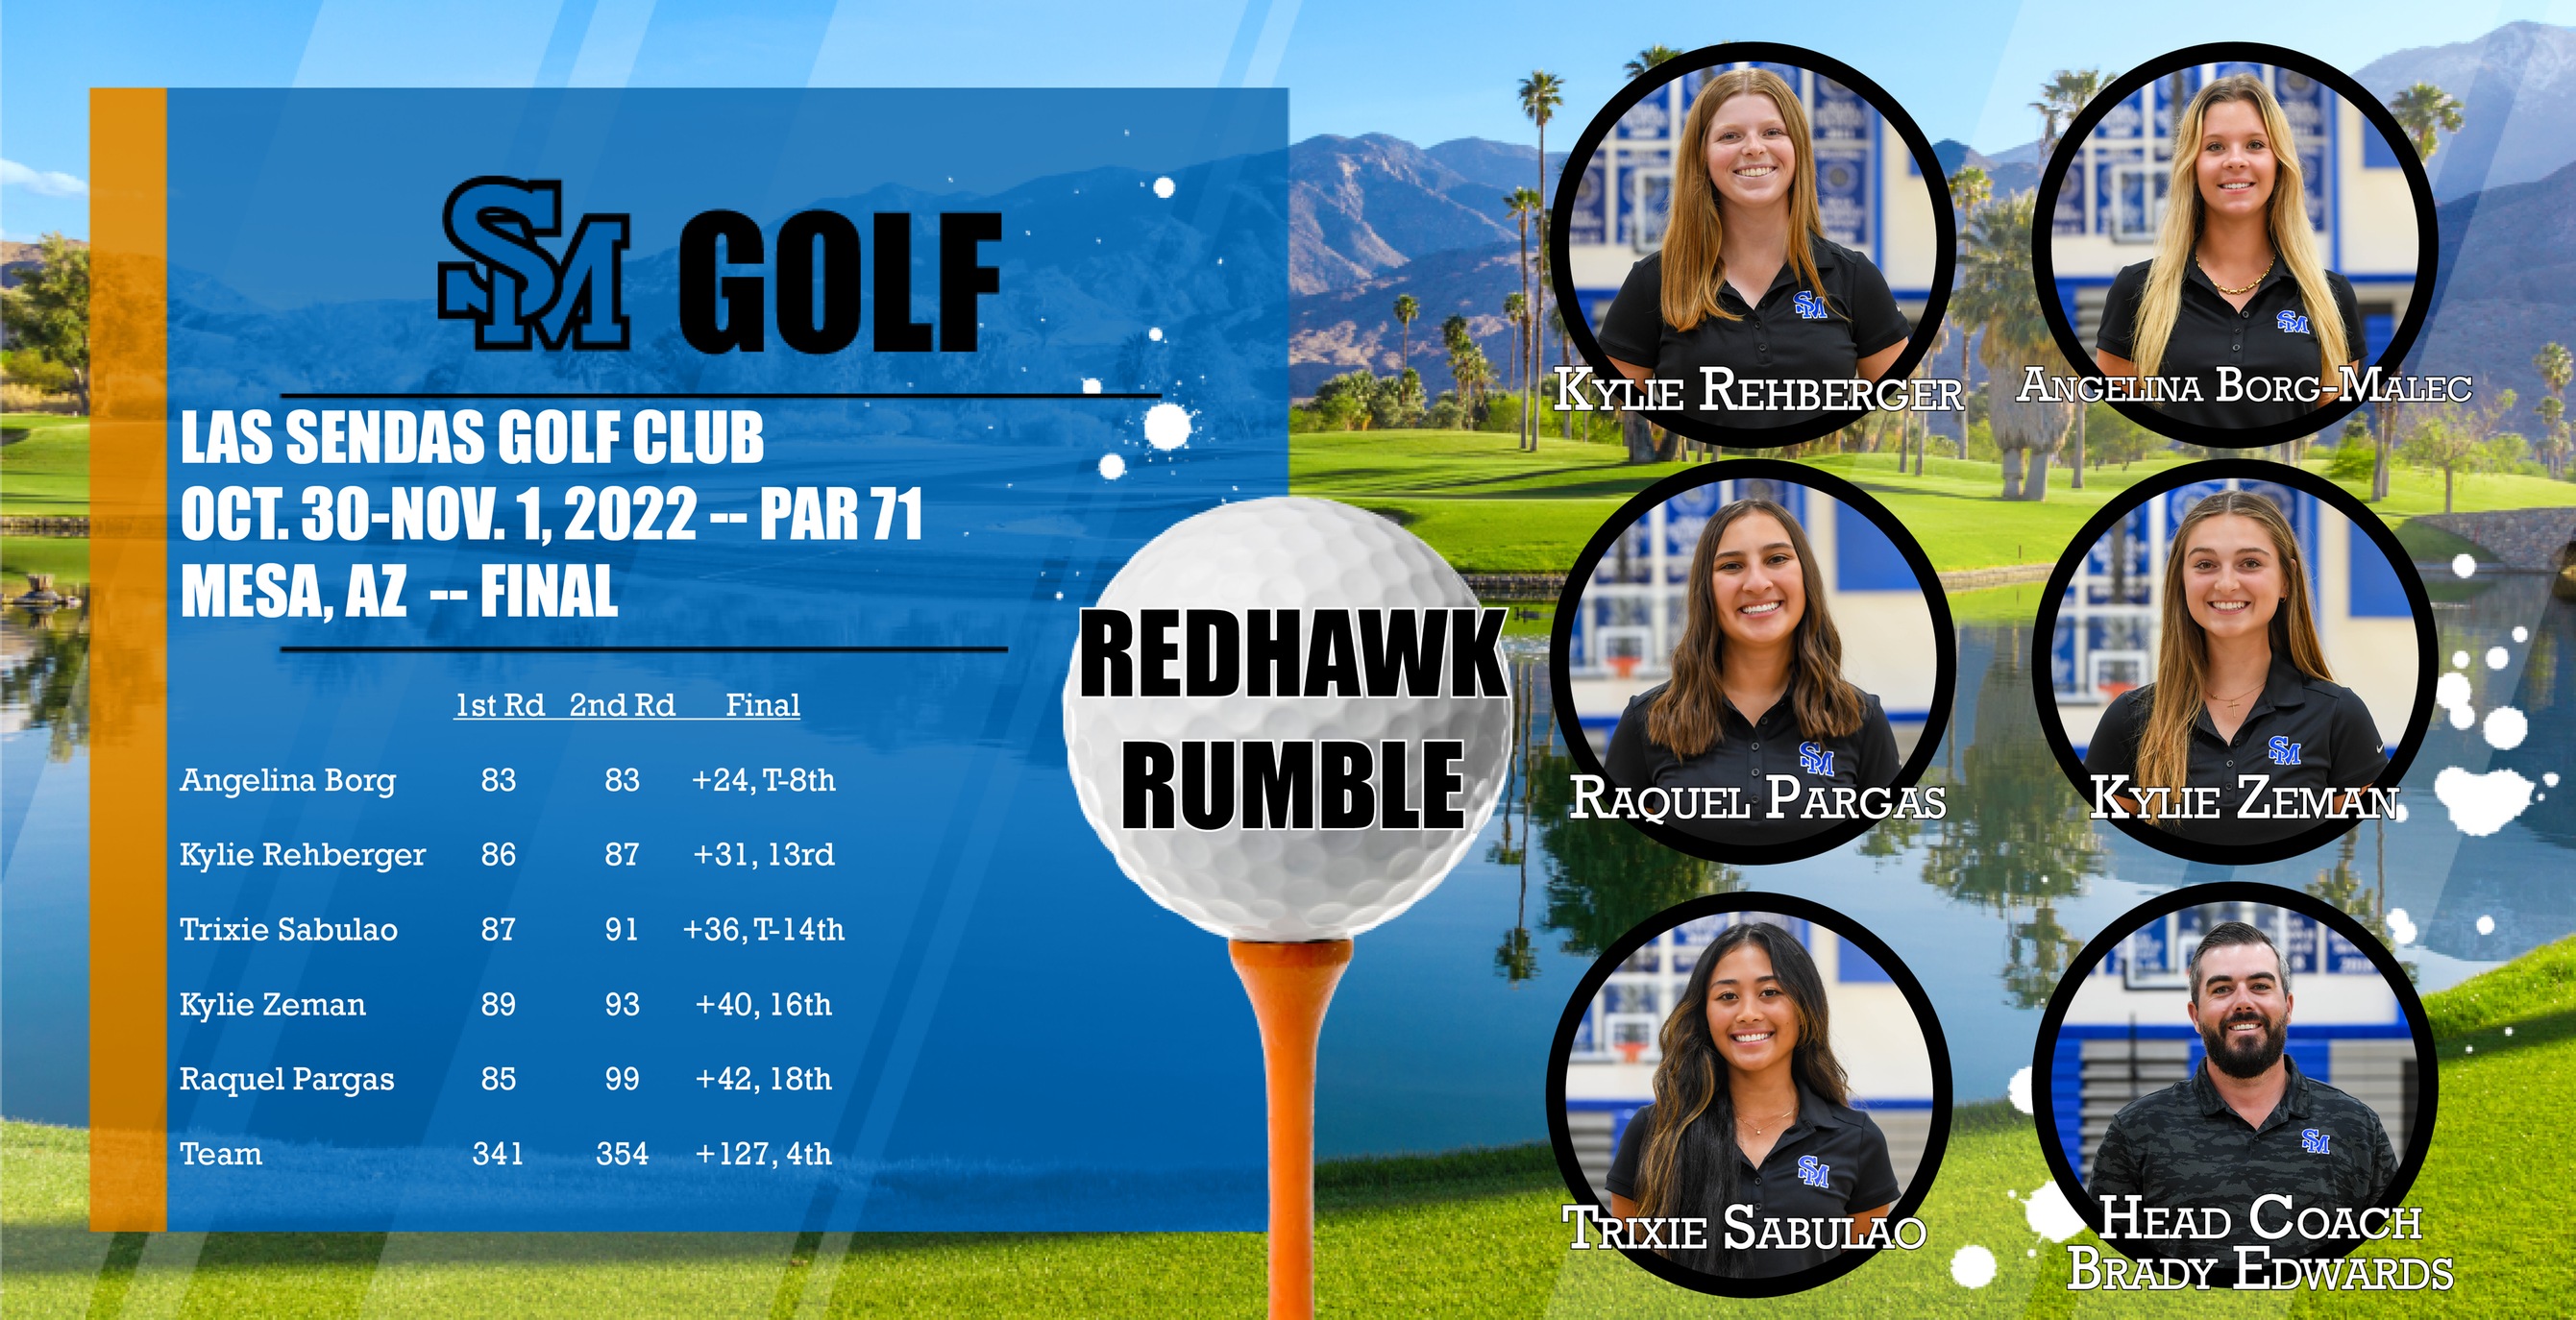 Angelina Borg-Malec Ties for Eighth at Redhawk Rumble